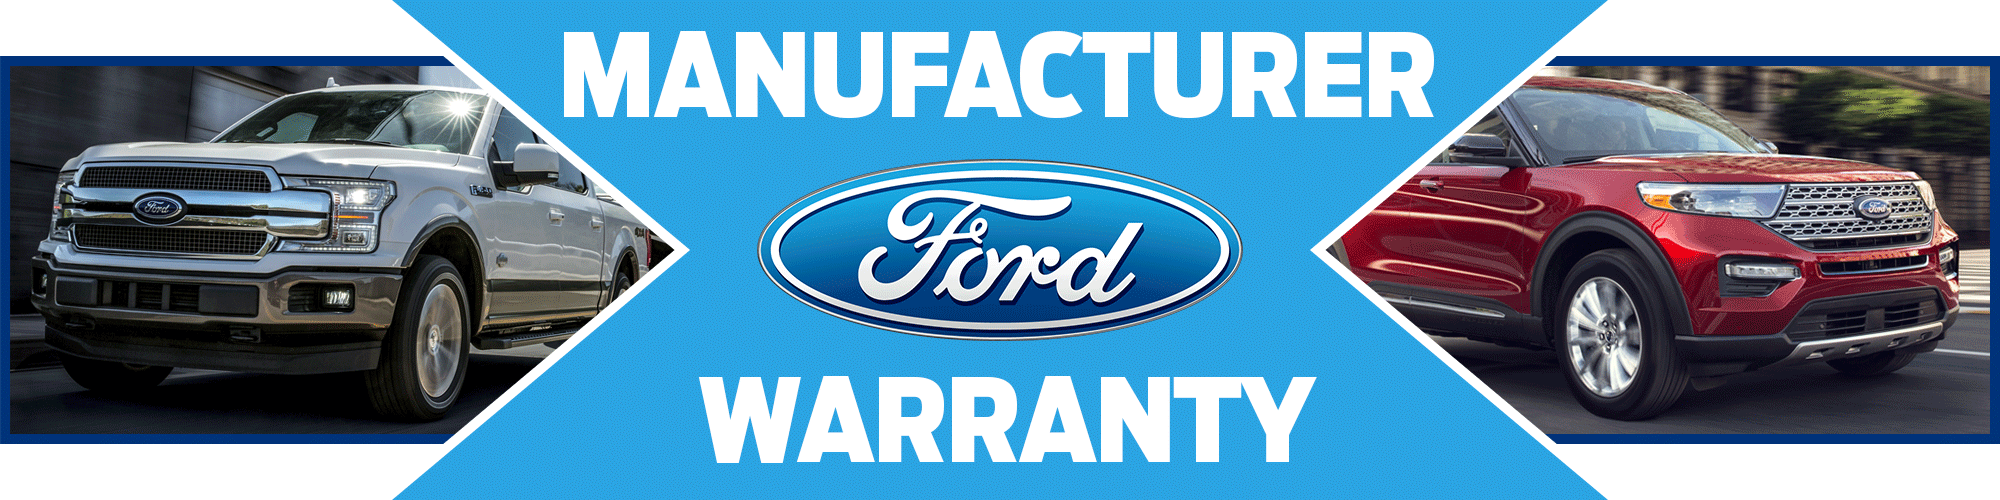 Ford Manufacturer Warranty What Does It Cover?